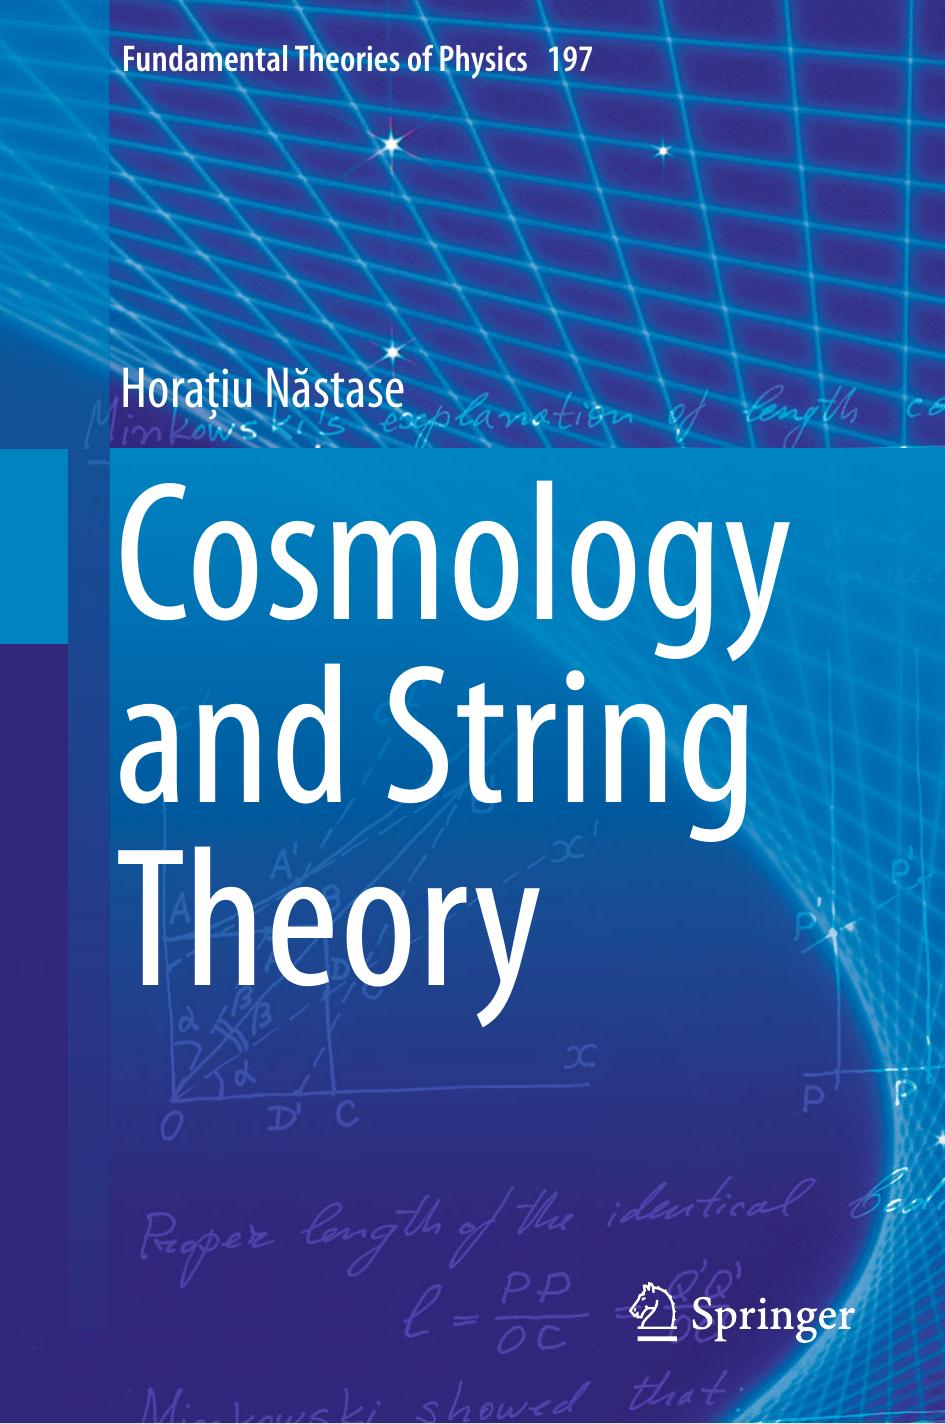 Cosmology and String Theory by Horaţiu Năstase